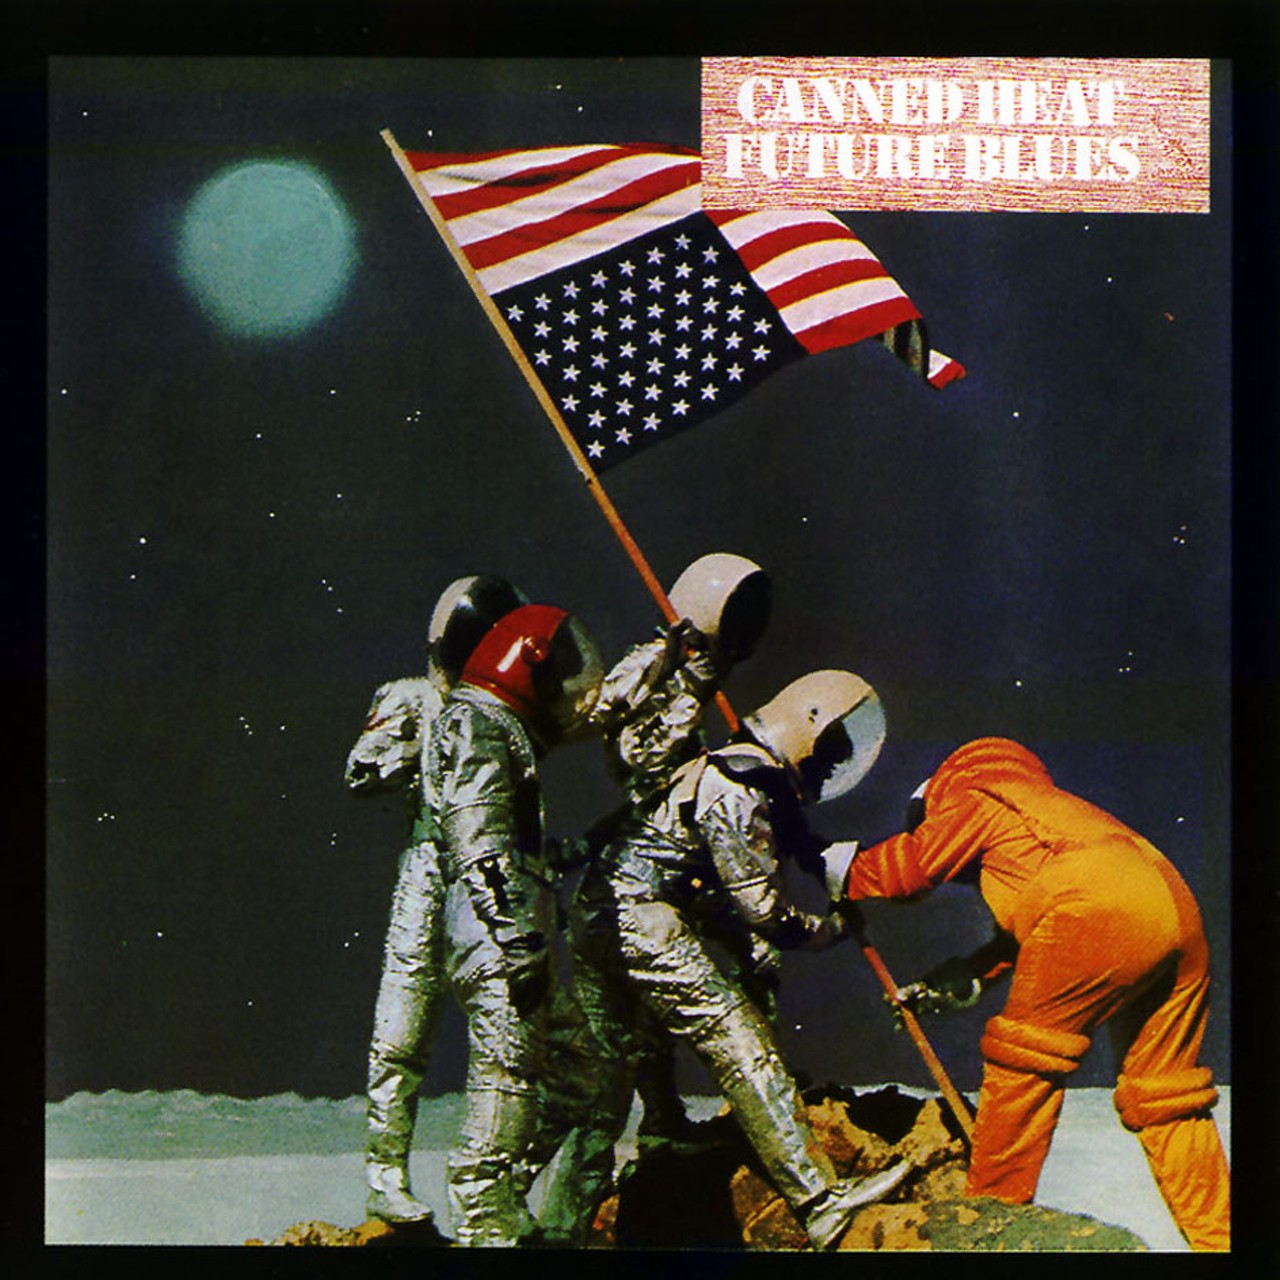 Canned Heat - Future Blues (1970)
The cover for Future Blues, released by LA boogie-rockers Canned Heat, in 1970. They covered "Let's Work Together" by Wilbert Harrison, originally released in 1962, and became a hit again on Future Blues.